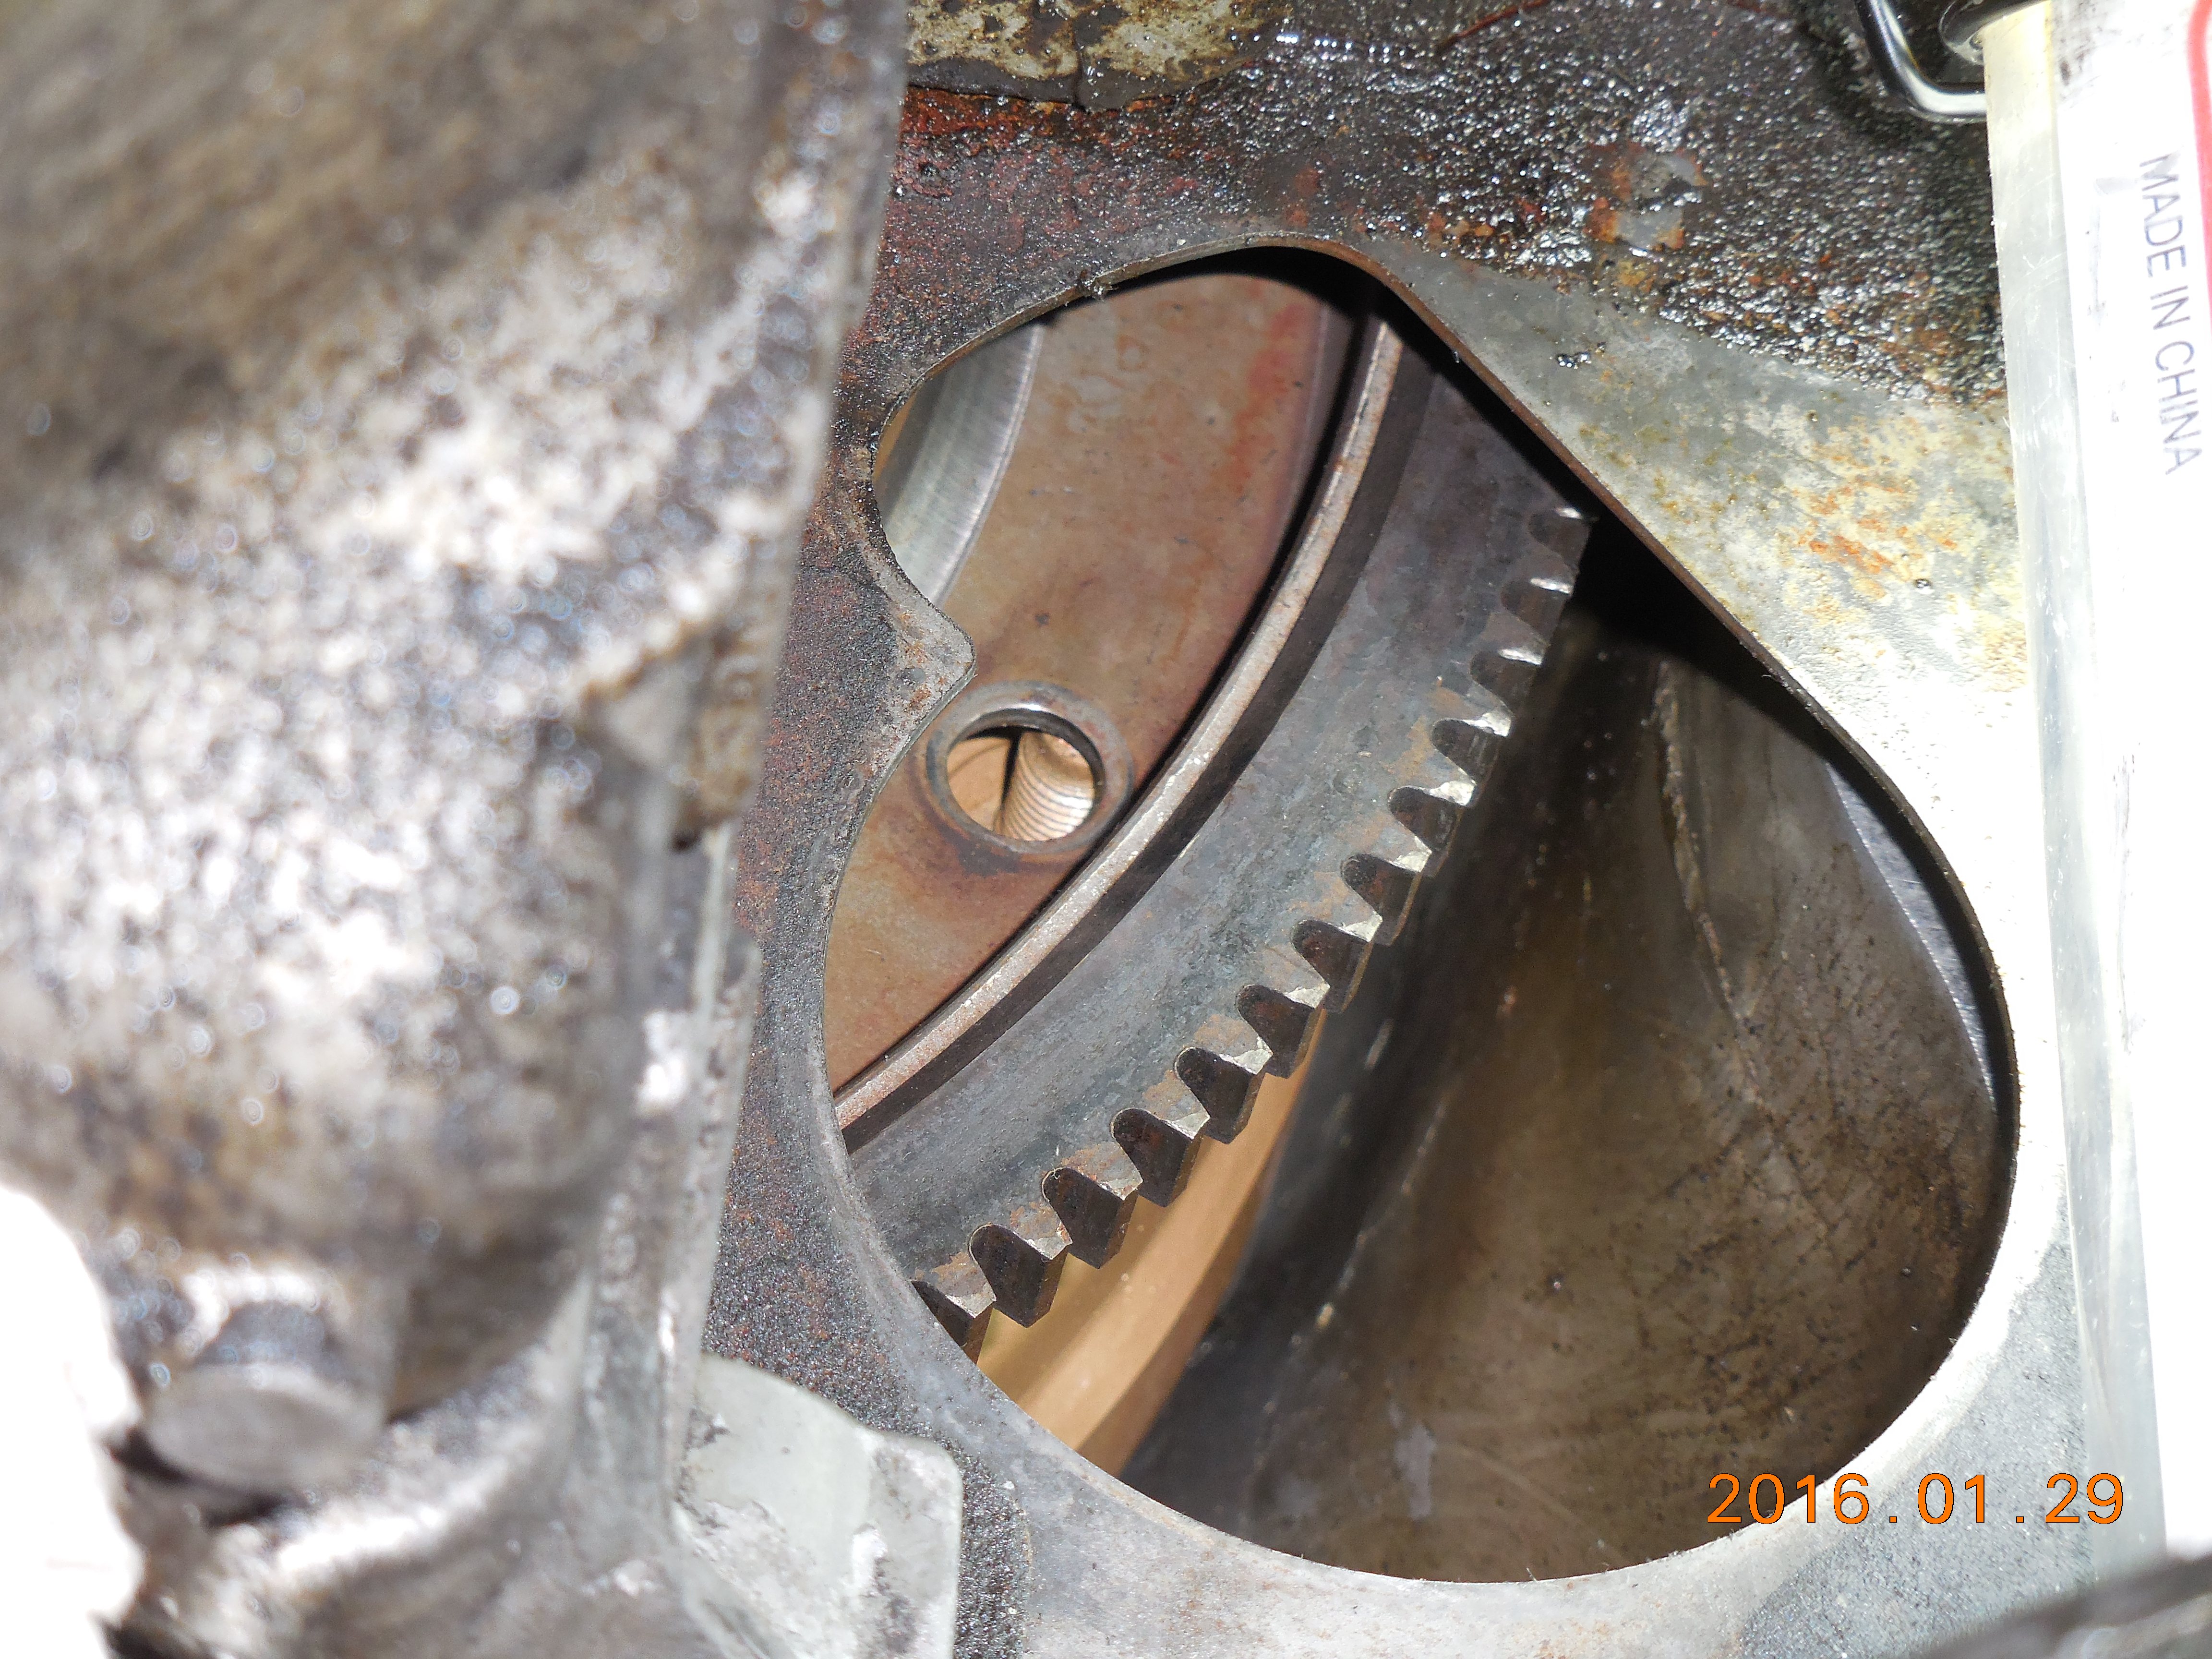 1997 Aerostar 4.0l OHV e4WD, torque converter stud to flex plate alignment through starter mounting hole.  This is tricky to get aligned, and trickier to get the nuts tightened &amp; torqued.  Lots of ratchet extensions to the front to get around the front axle and motor mount, IIRC.